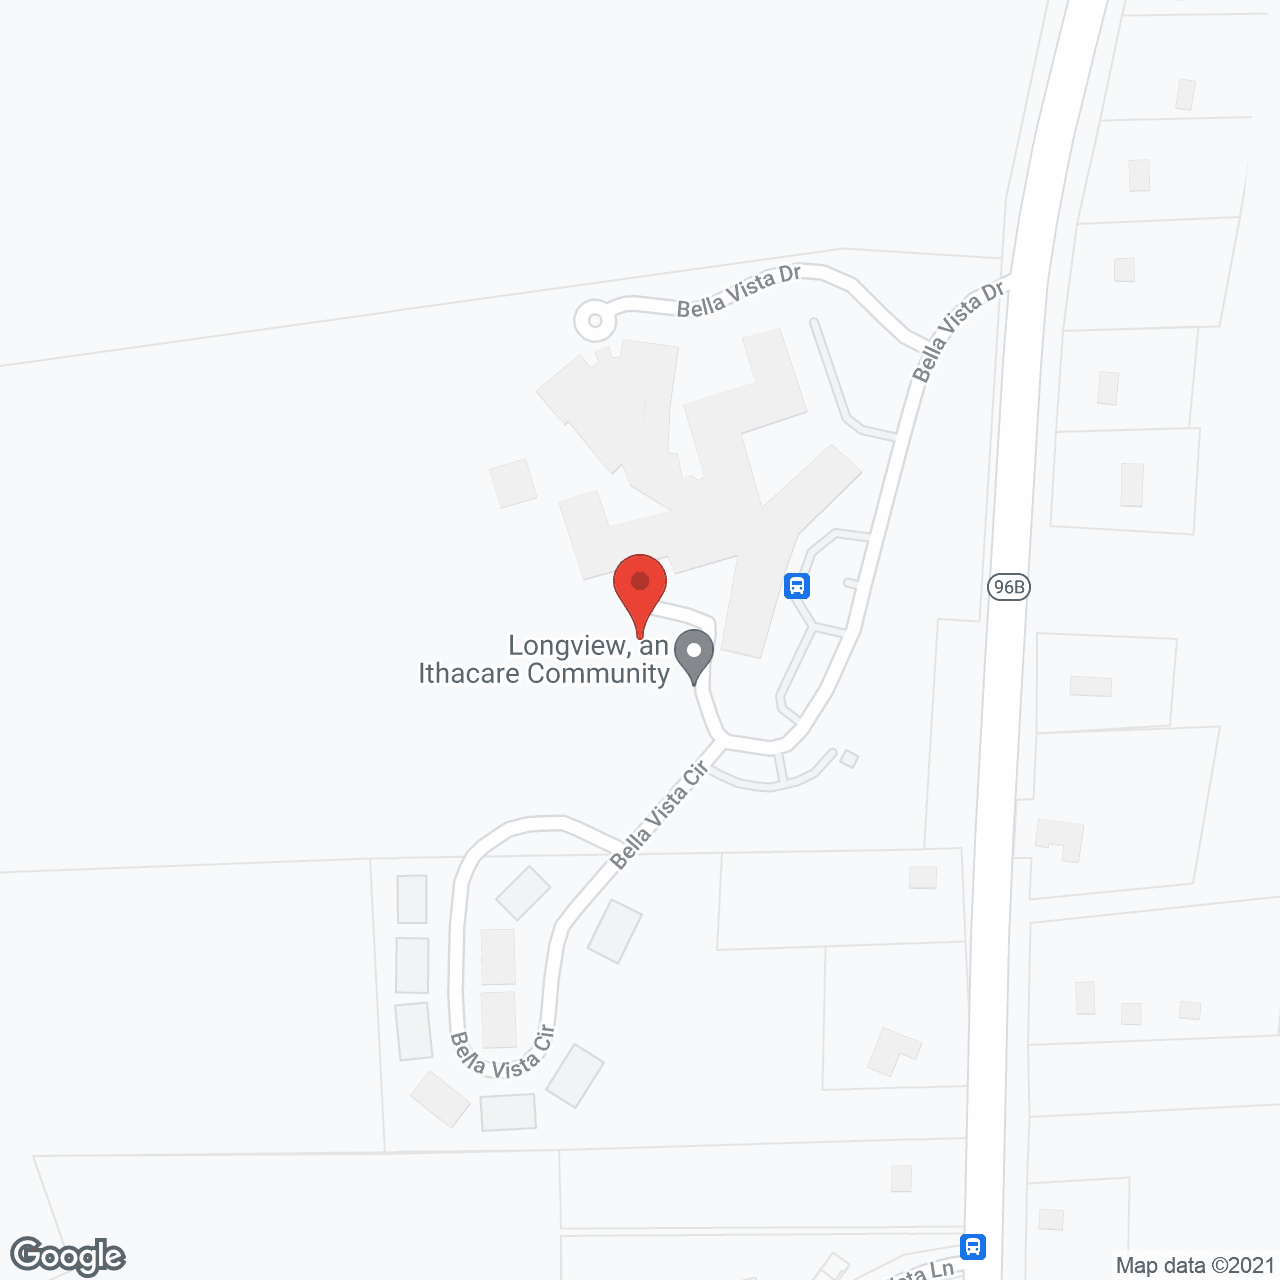 Longview, An Ithacare Community in google map